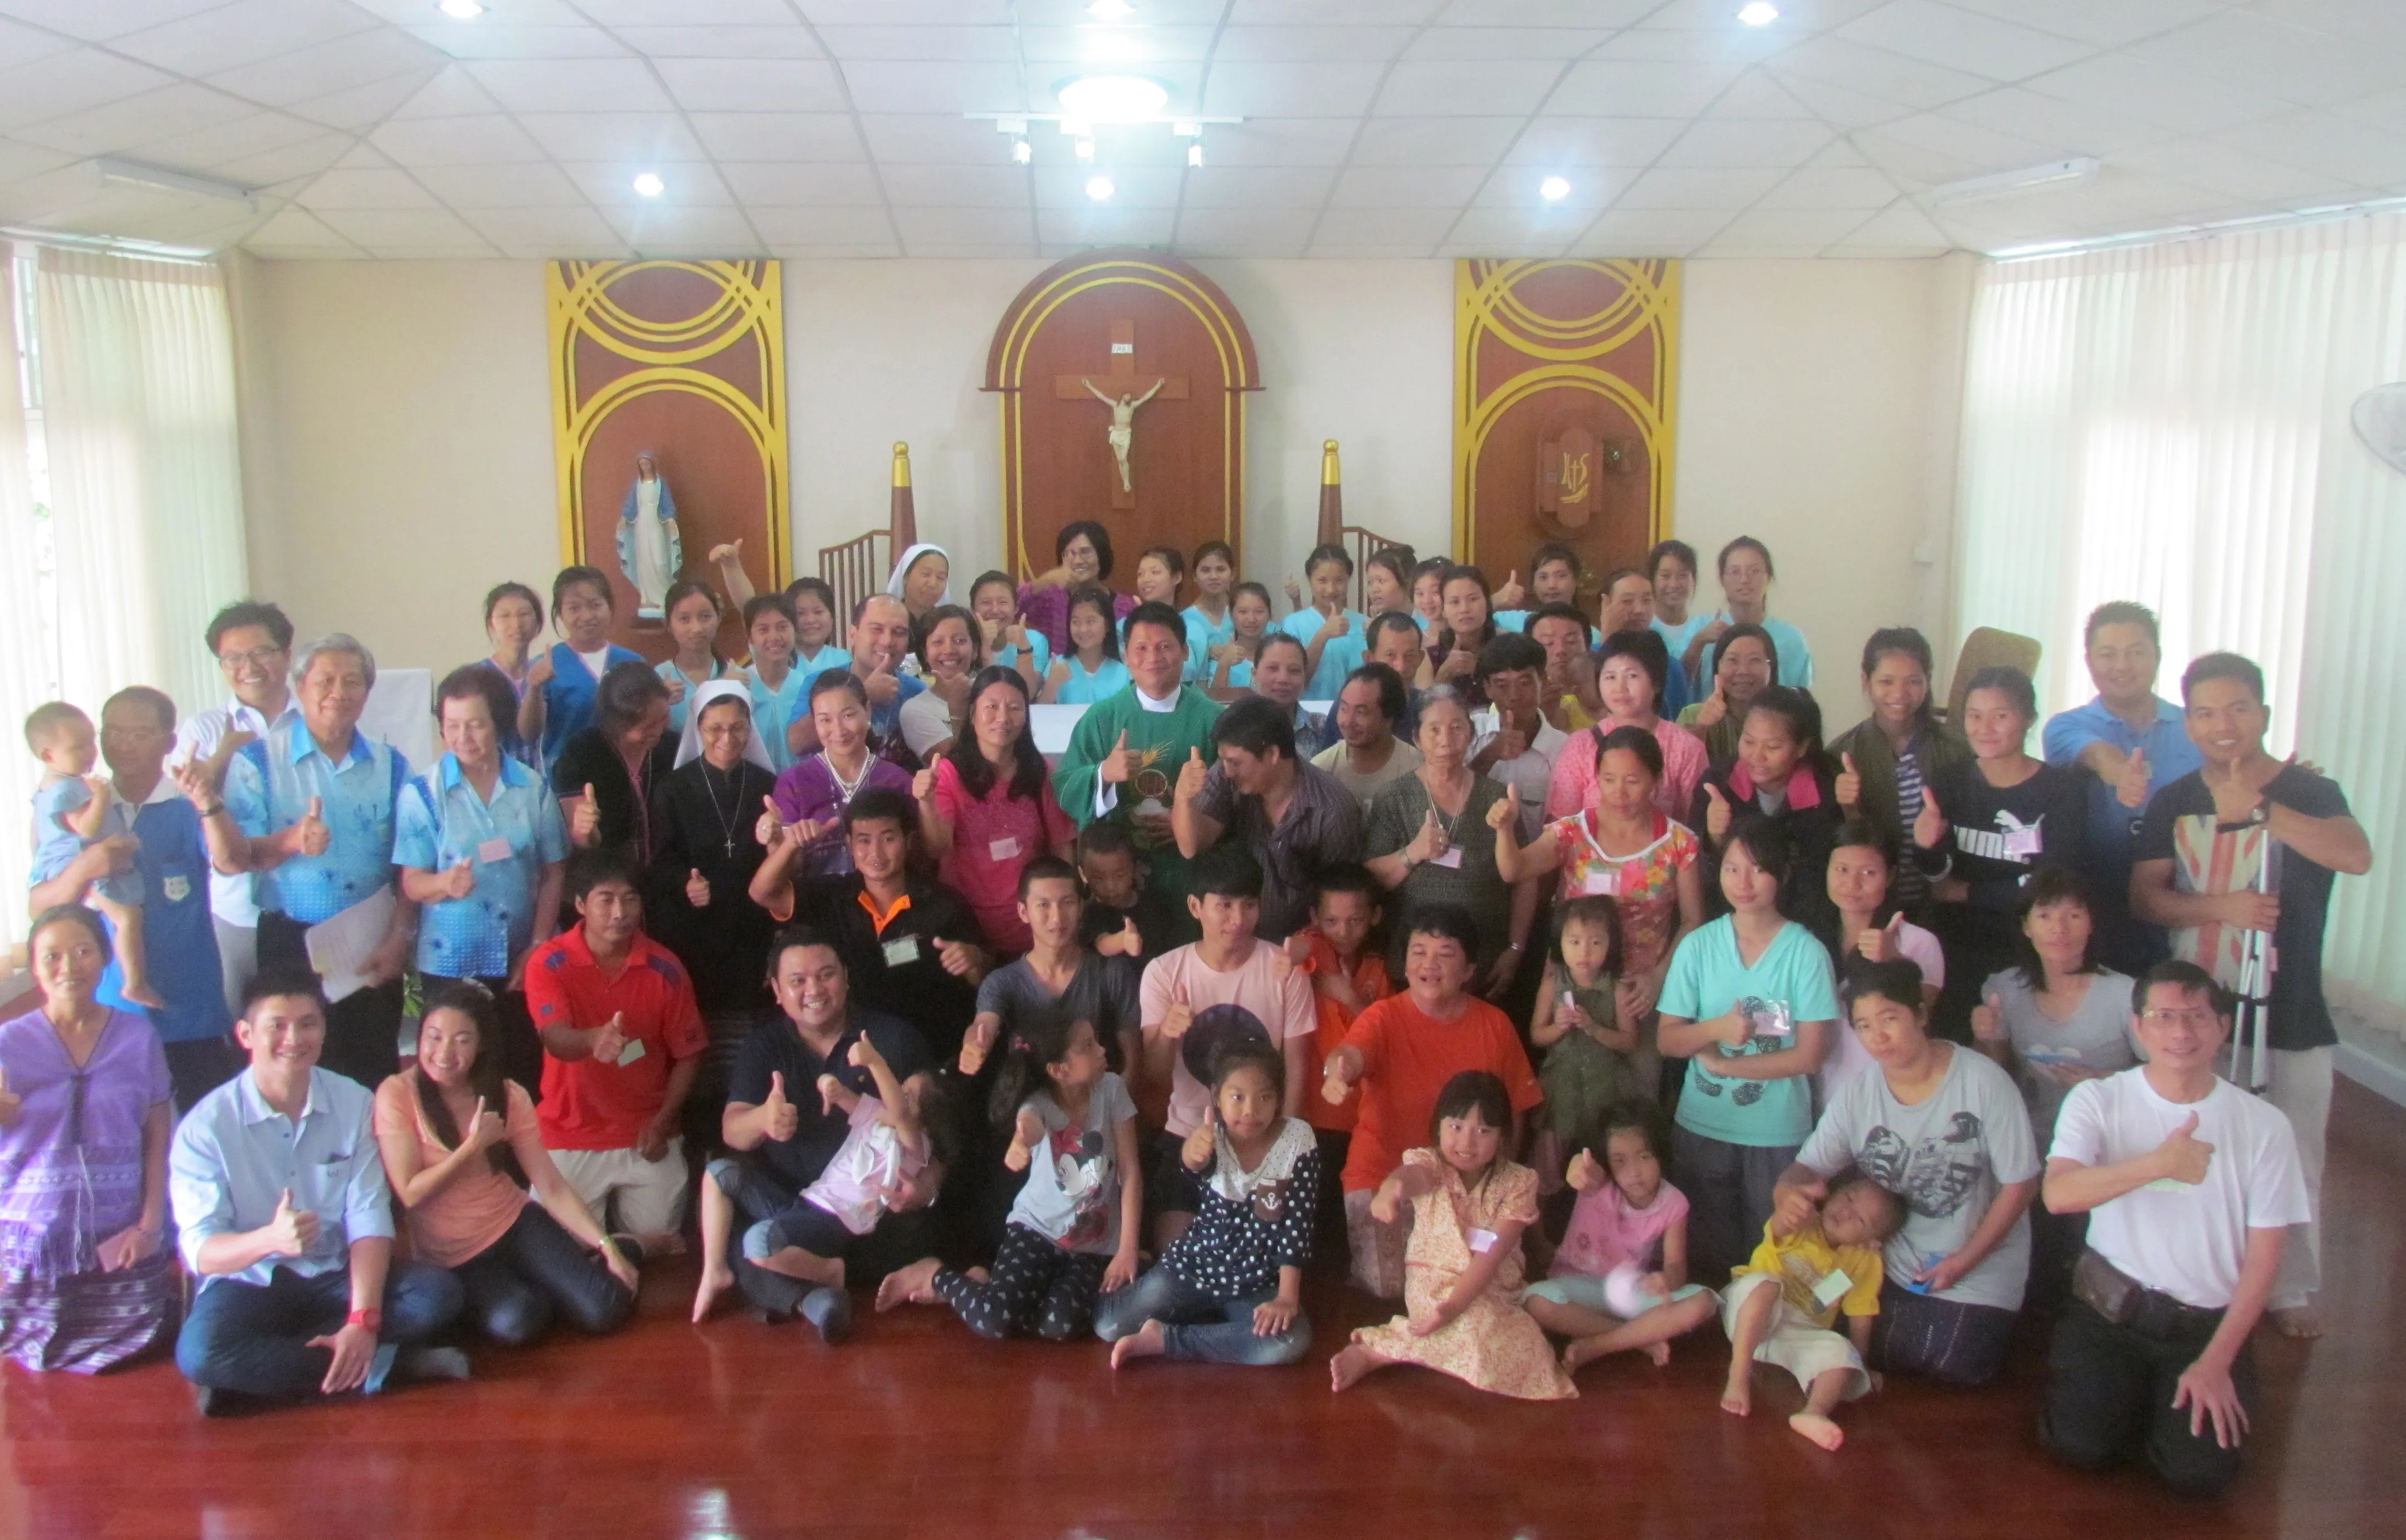 Thai Families Gather For Fellowship Discussion Of Challenges